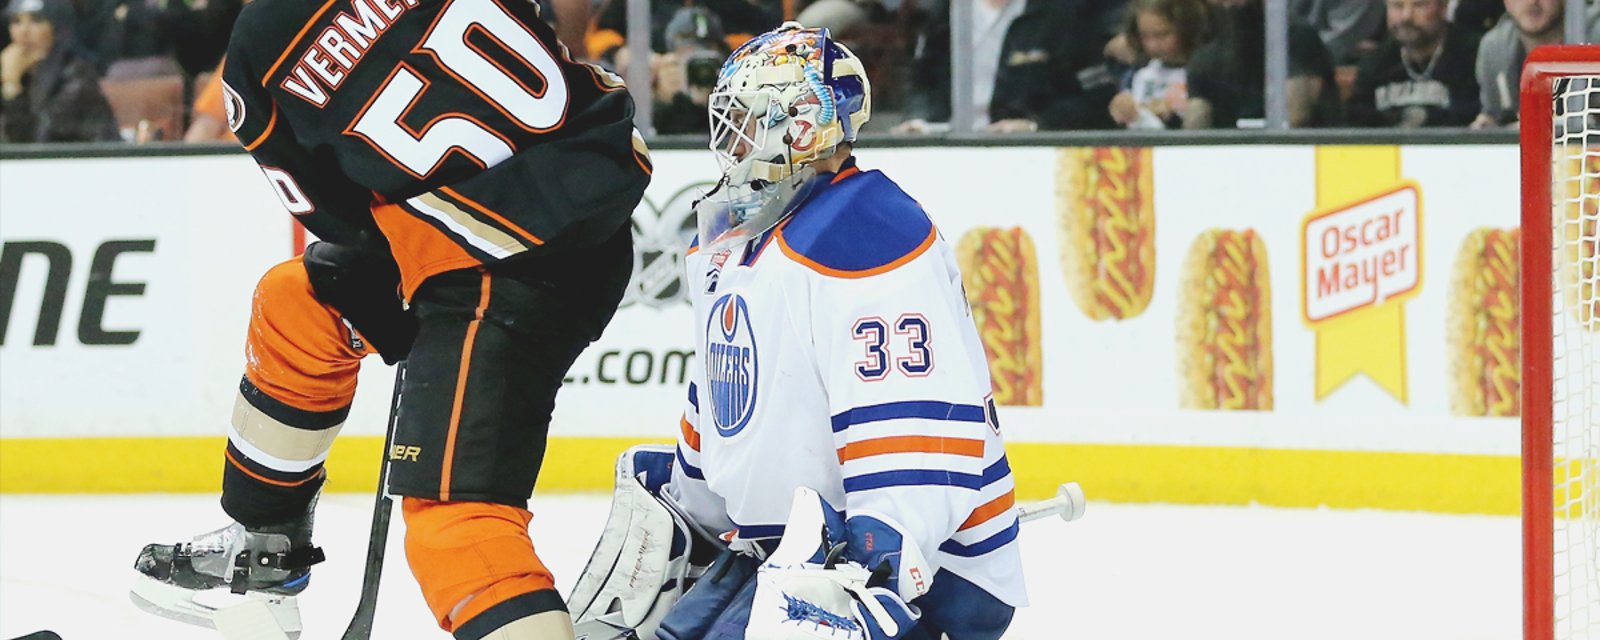 FURIOUS, Cam Talbot publicly CALLS OUT Corey Perry and the refs in post-game interview.